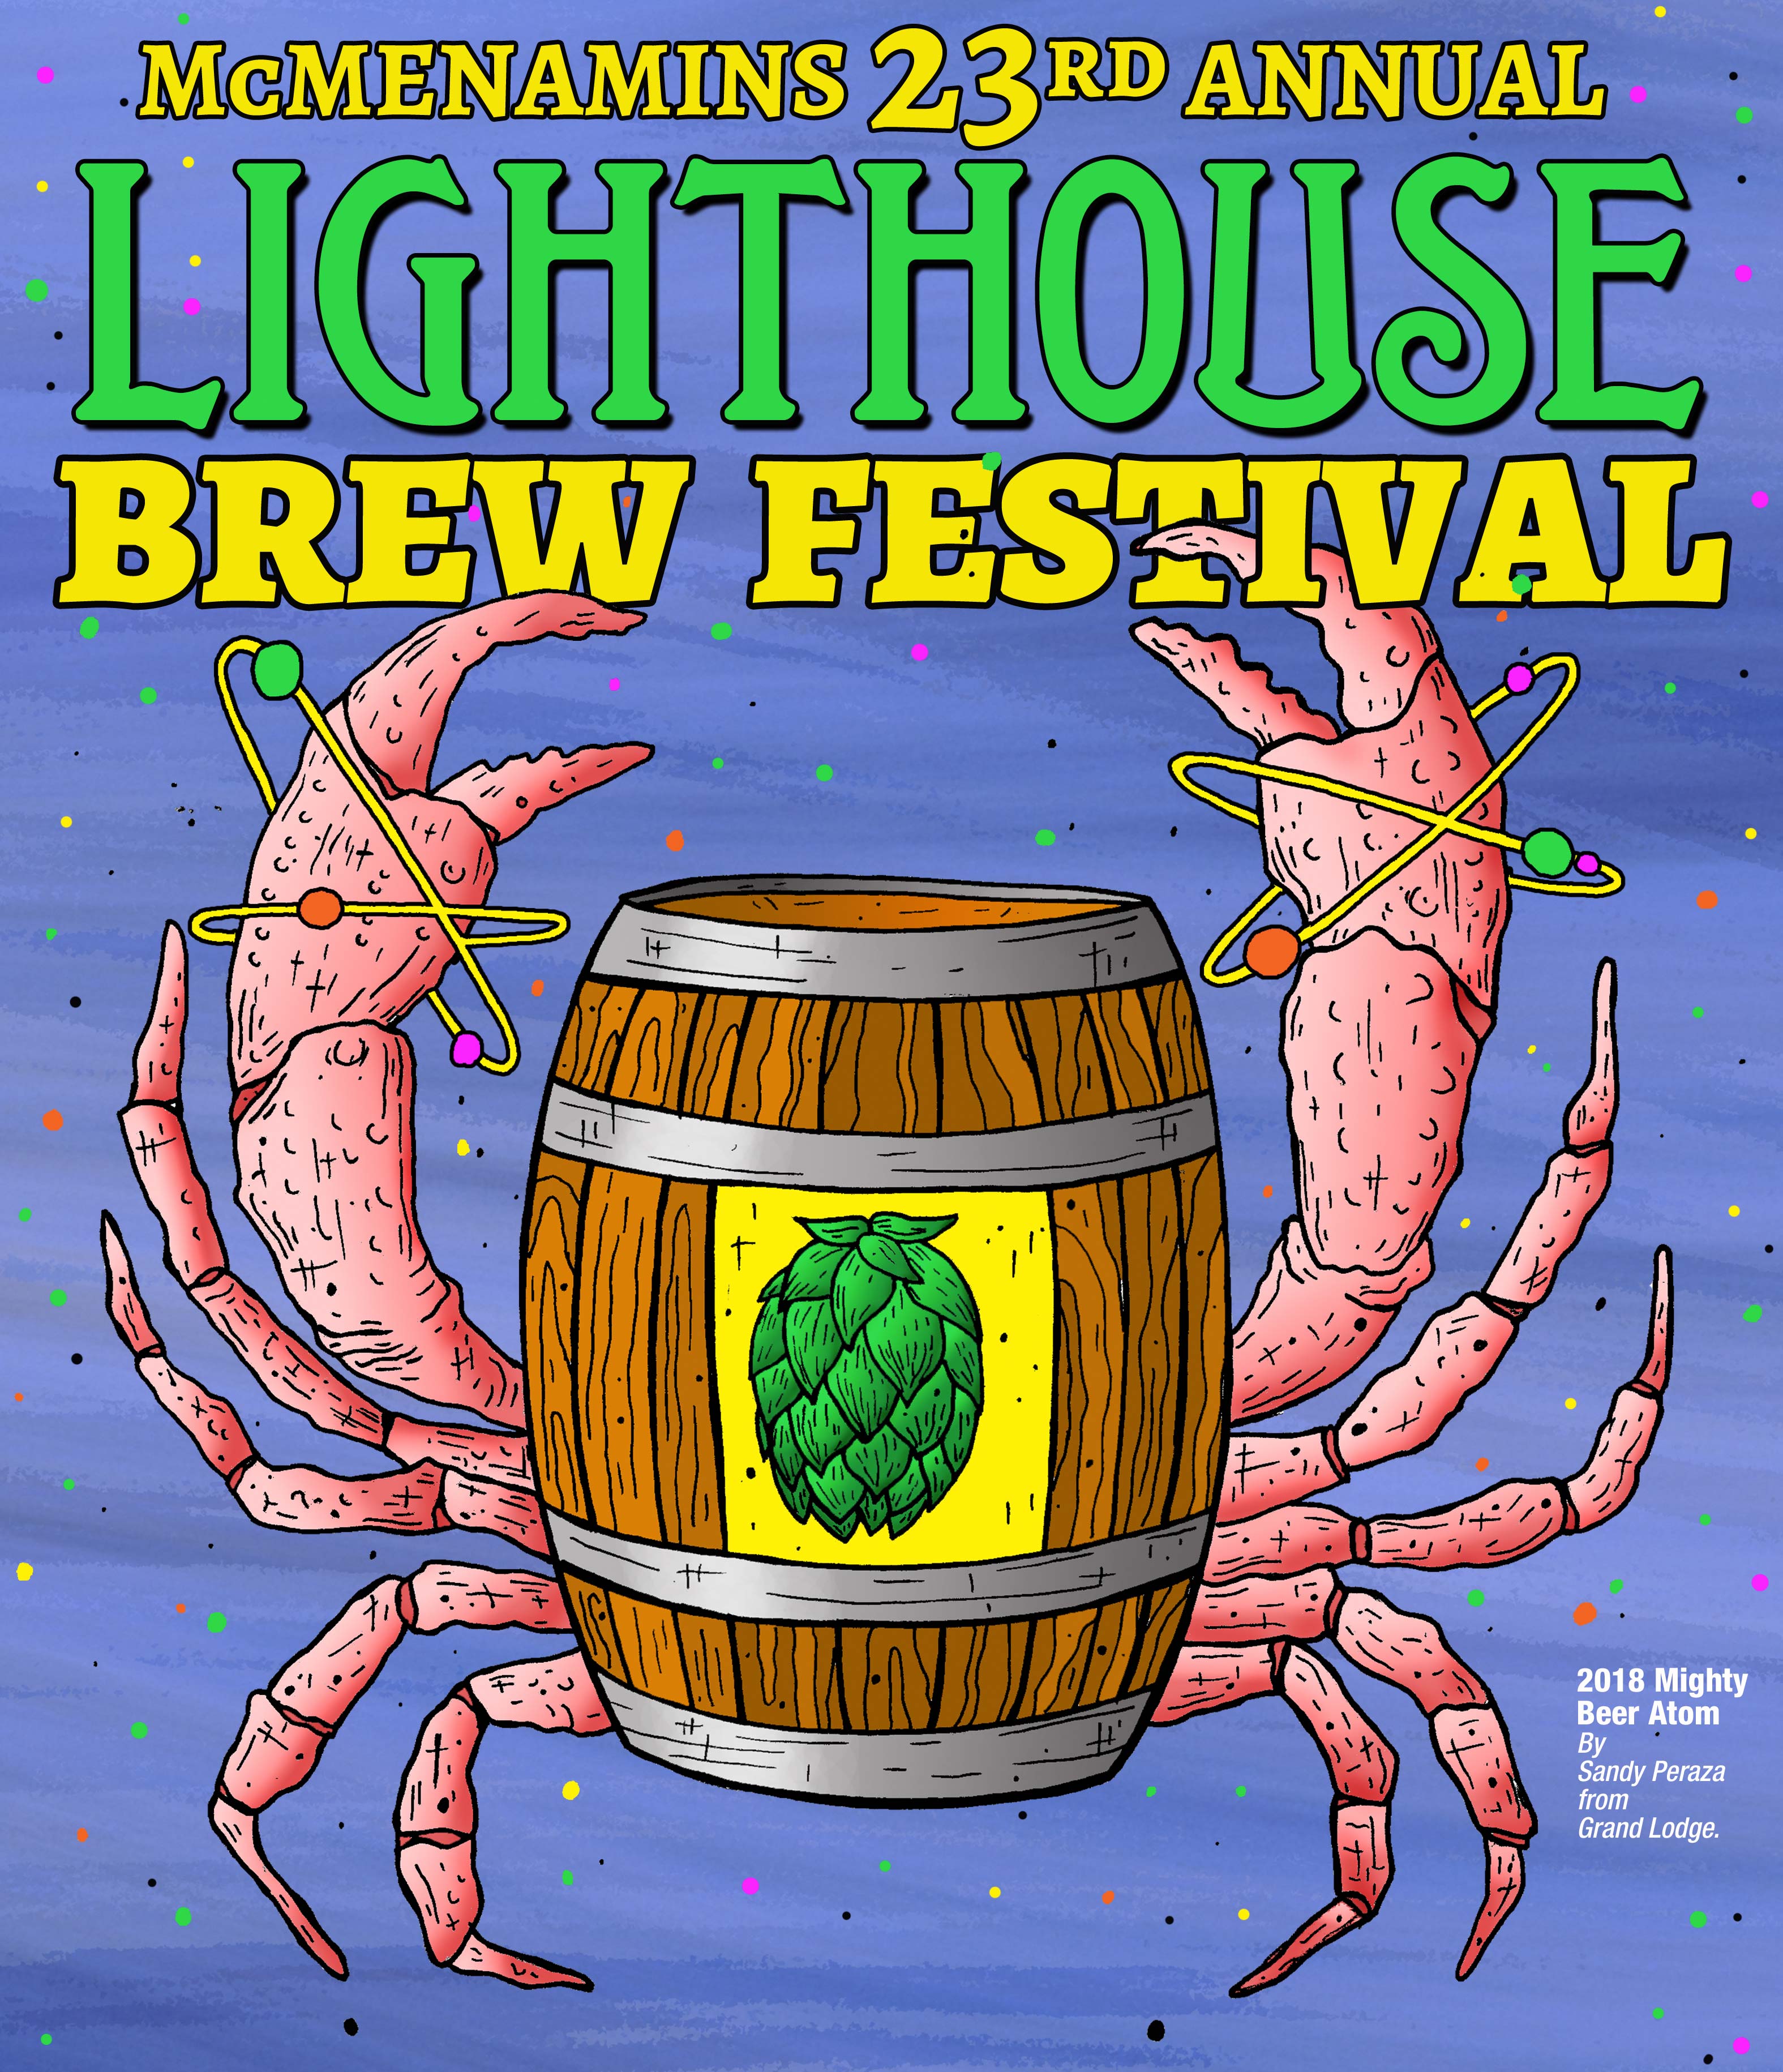 23rd Annual Lighthouse Brewfest